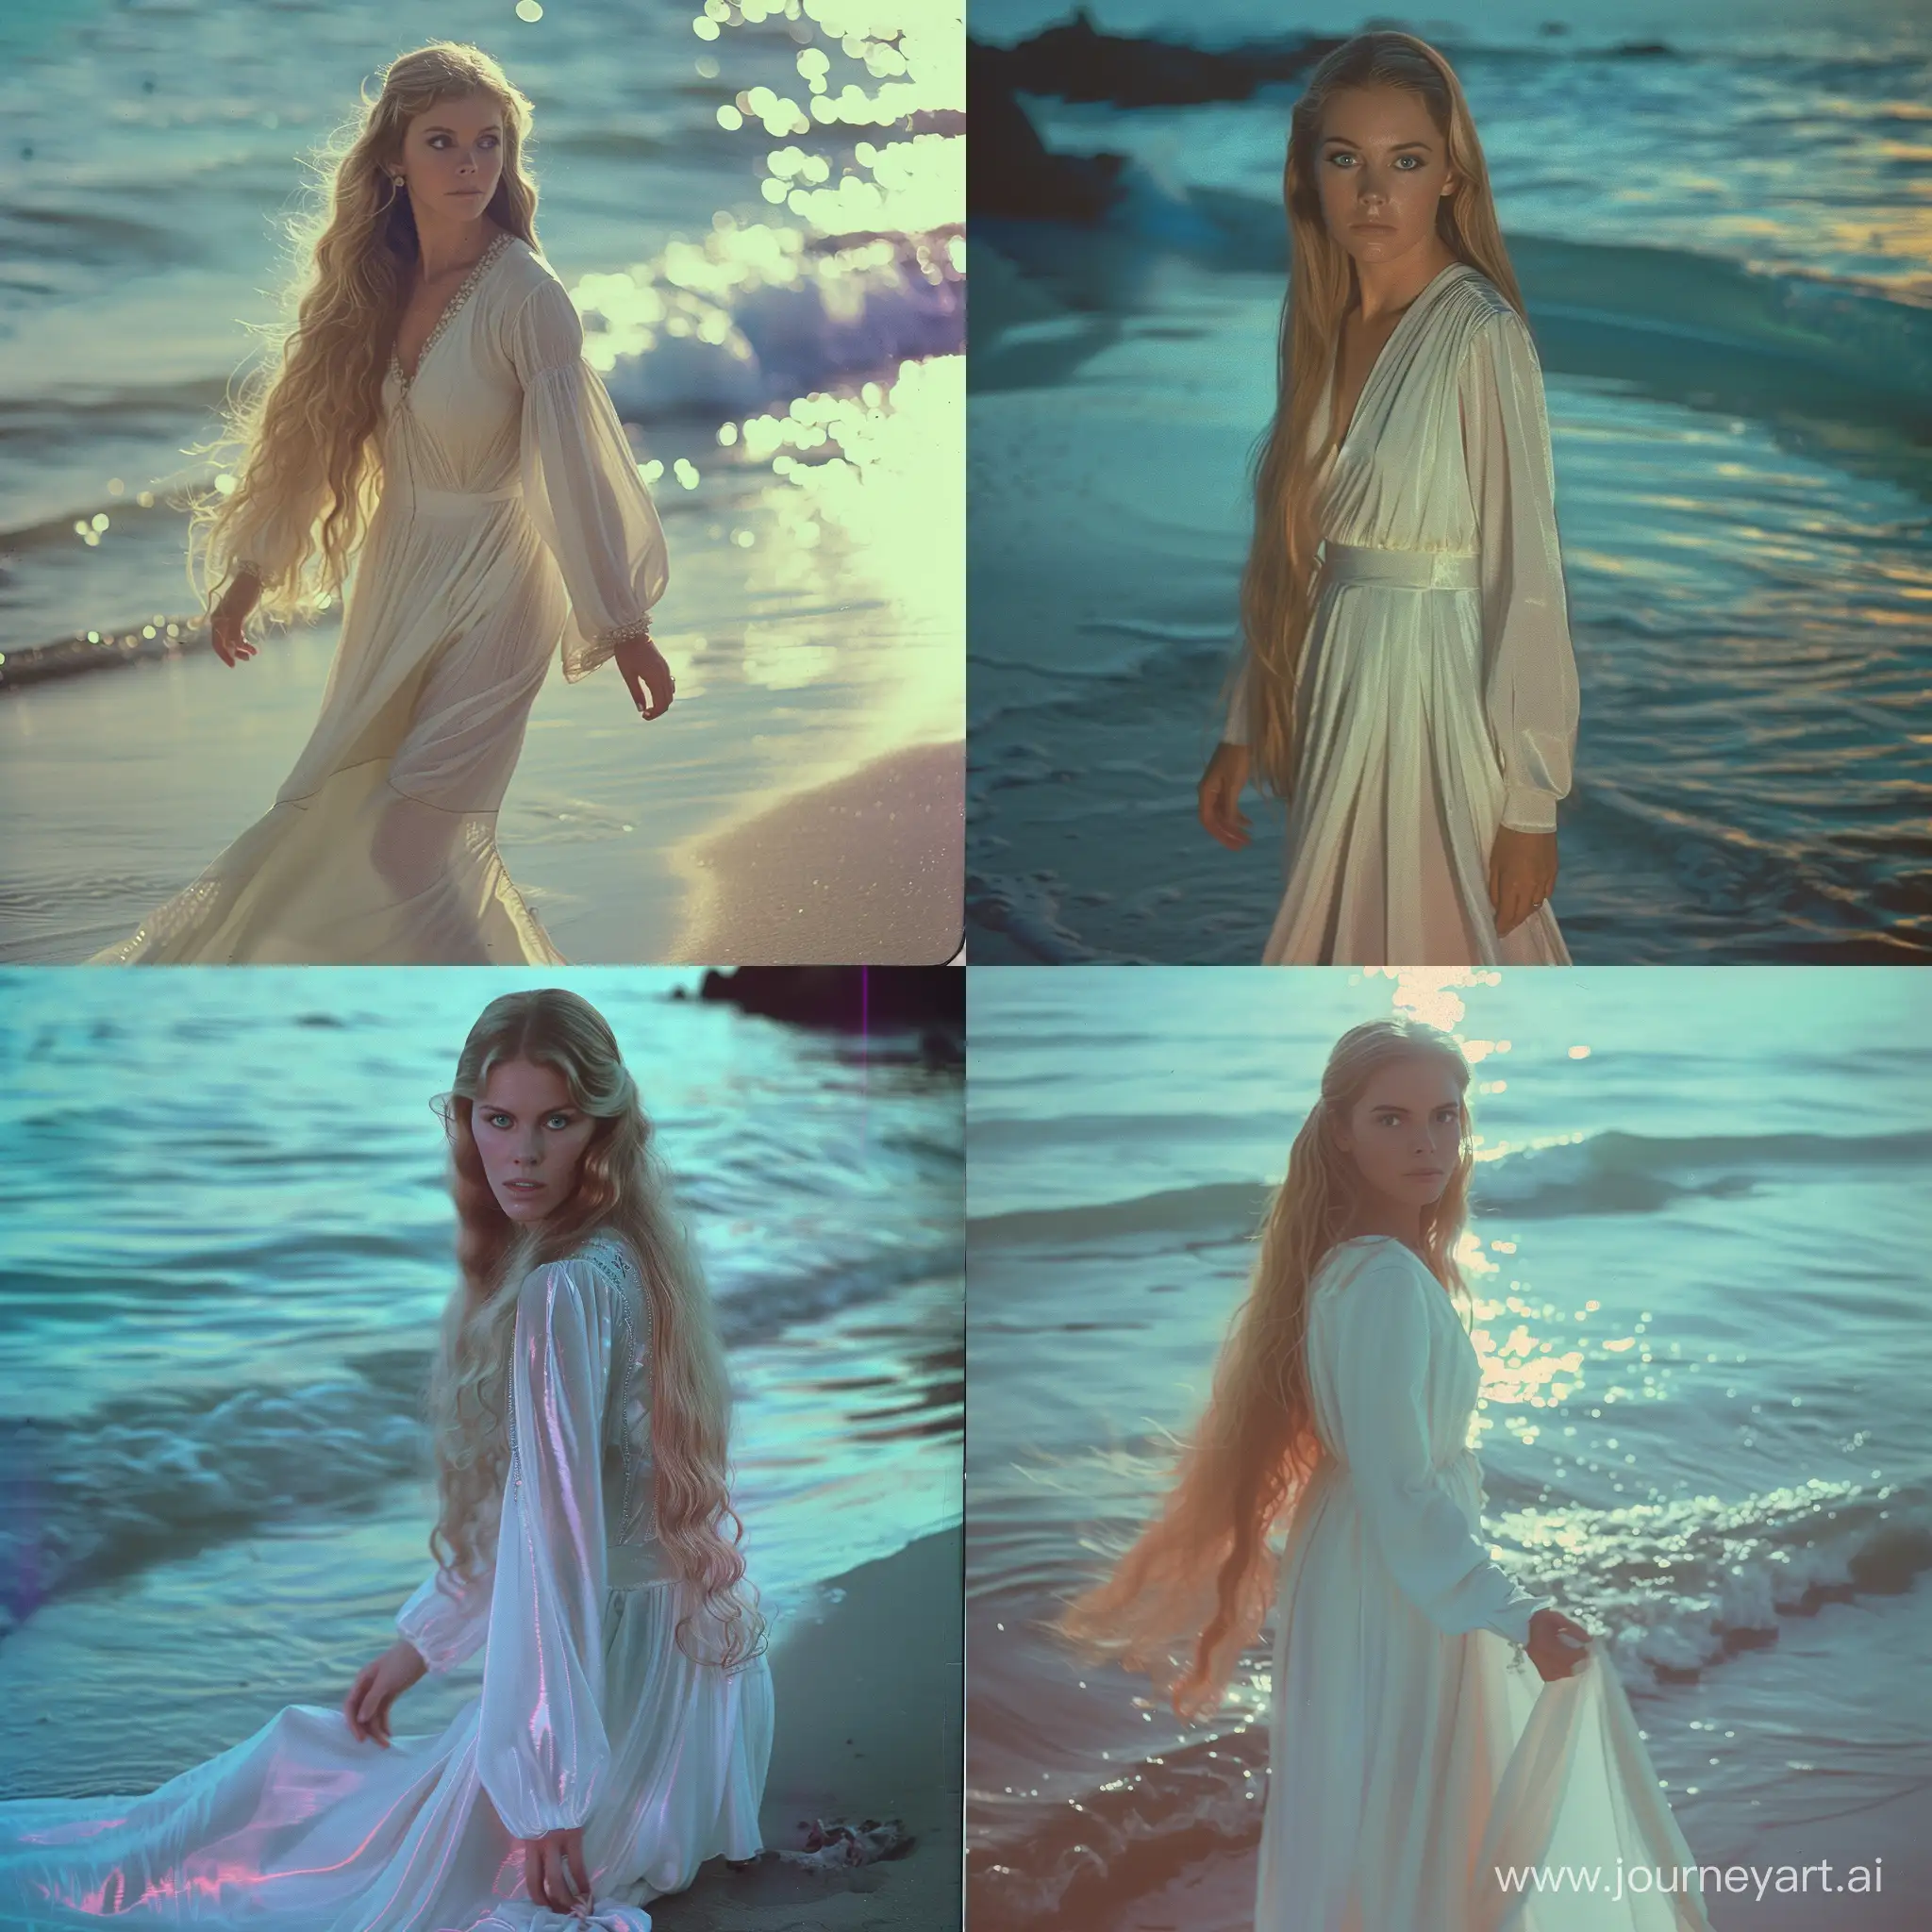 Blonde-Woman-in-White-Dress-by-Beach-Inspired-by-Excalibur-1981